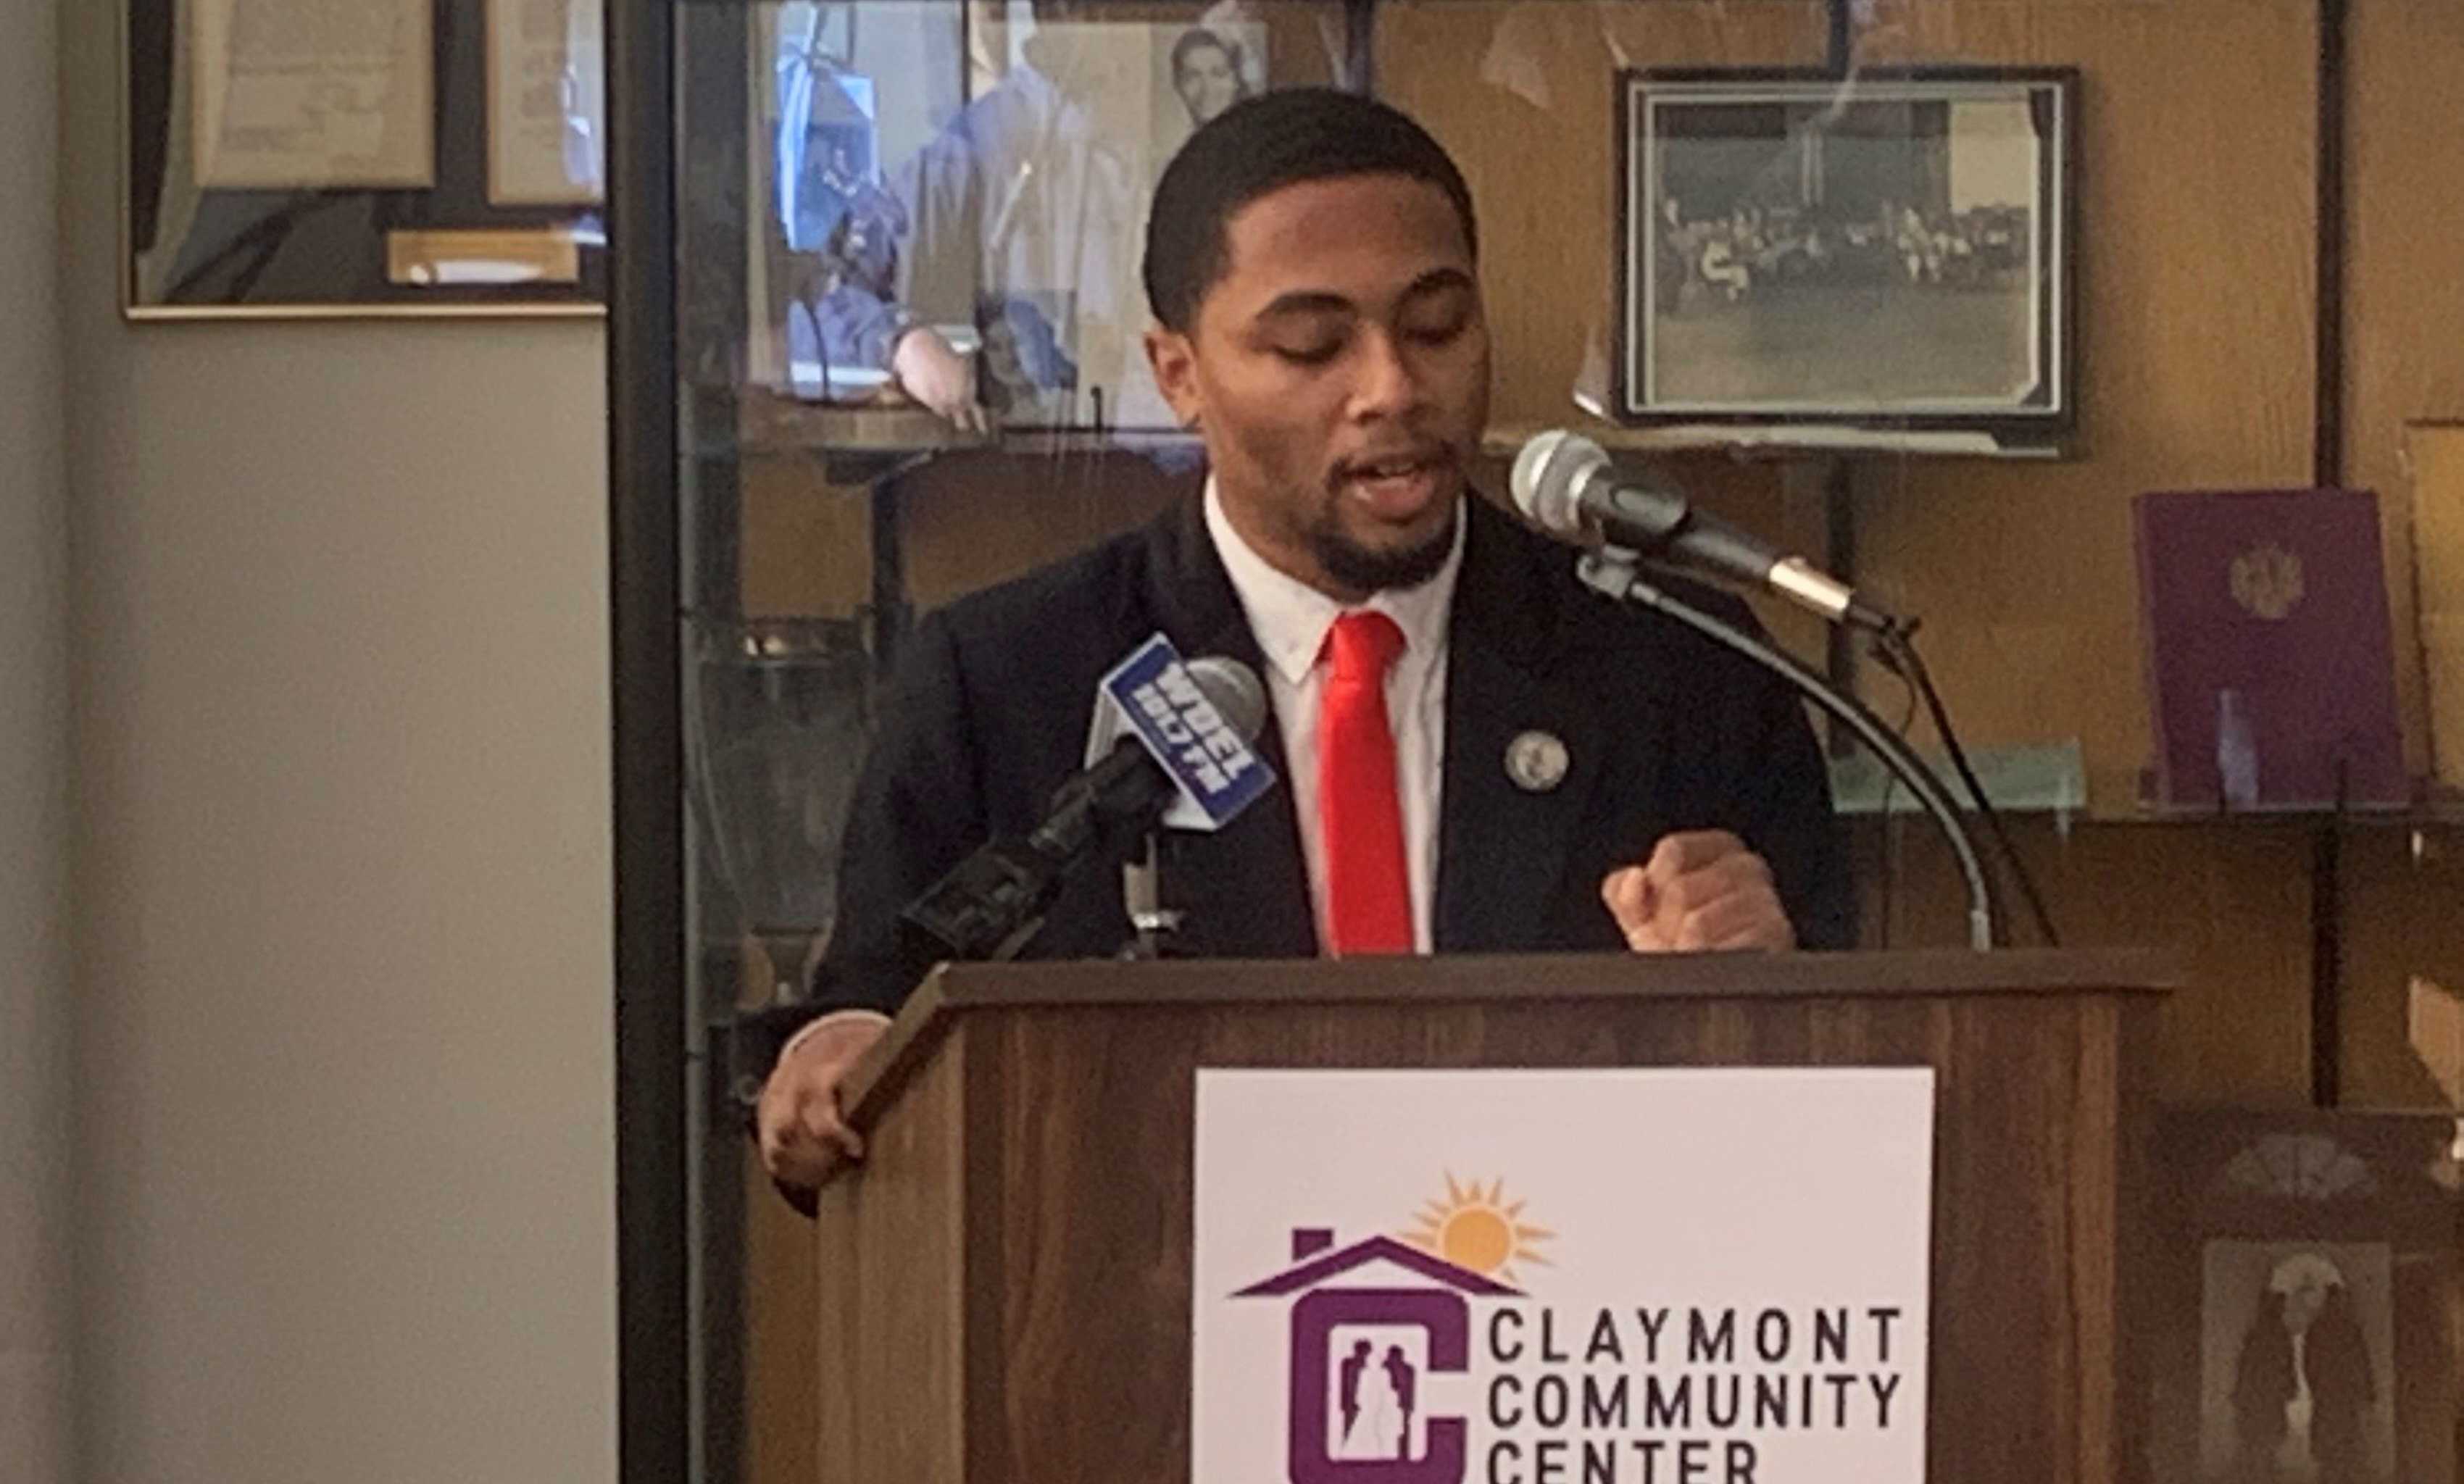 Student Government Association President David Hawkins speaks during the Feb.8 event in which Gov. John Carney signed a proclamation in recognition of Black History Month.